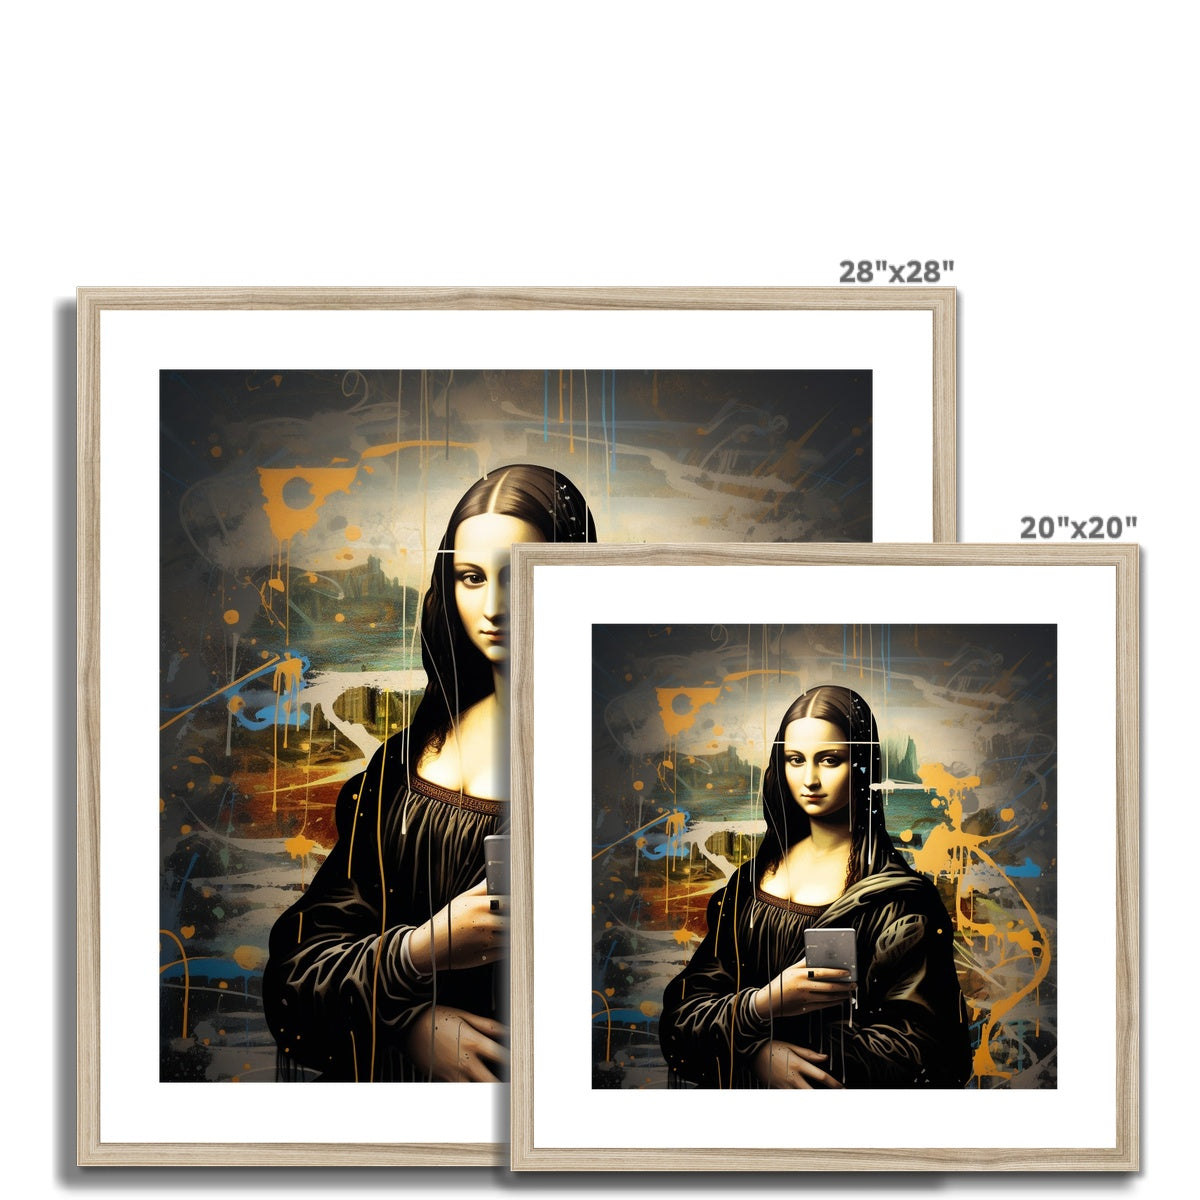 Millenial: The Mona Lisa Limited Edition Framed & Mounted Print